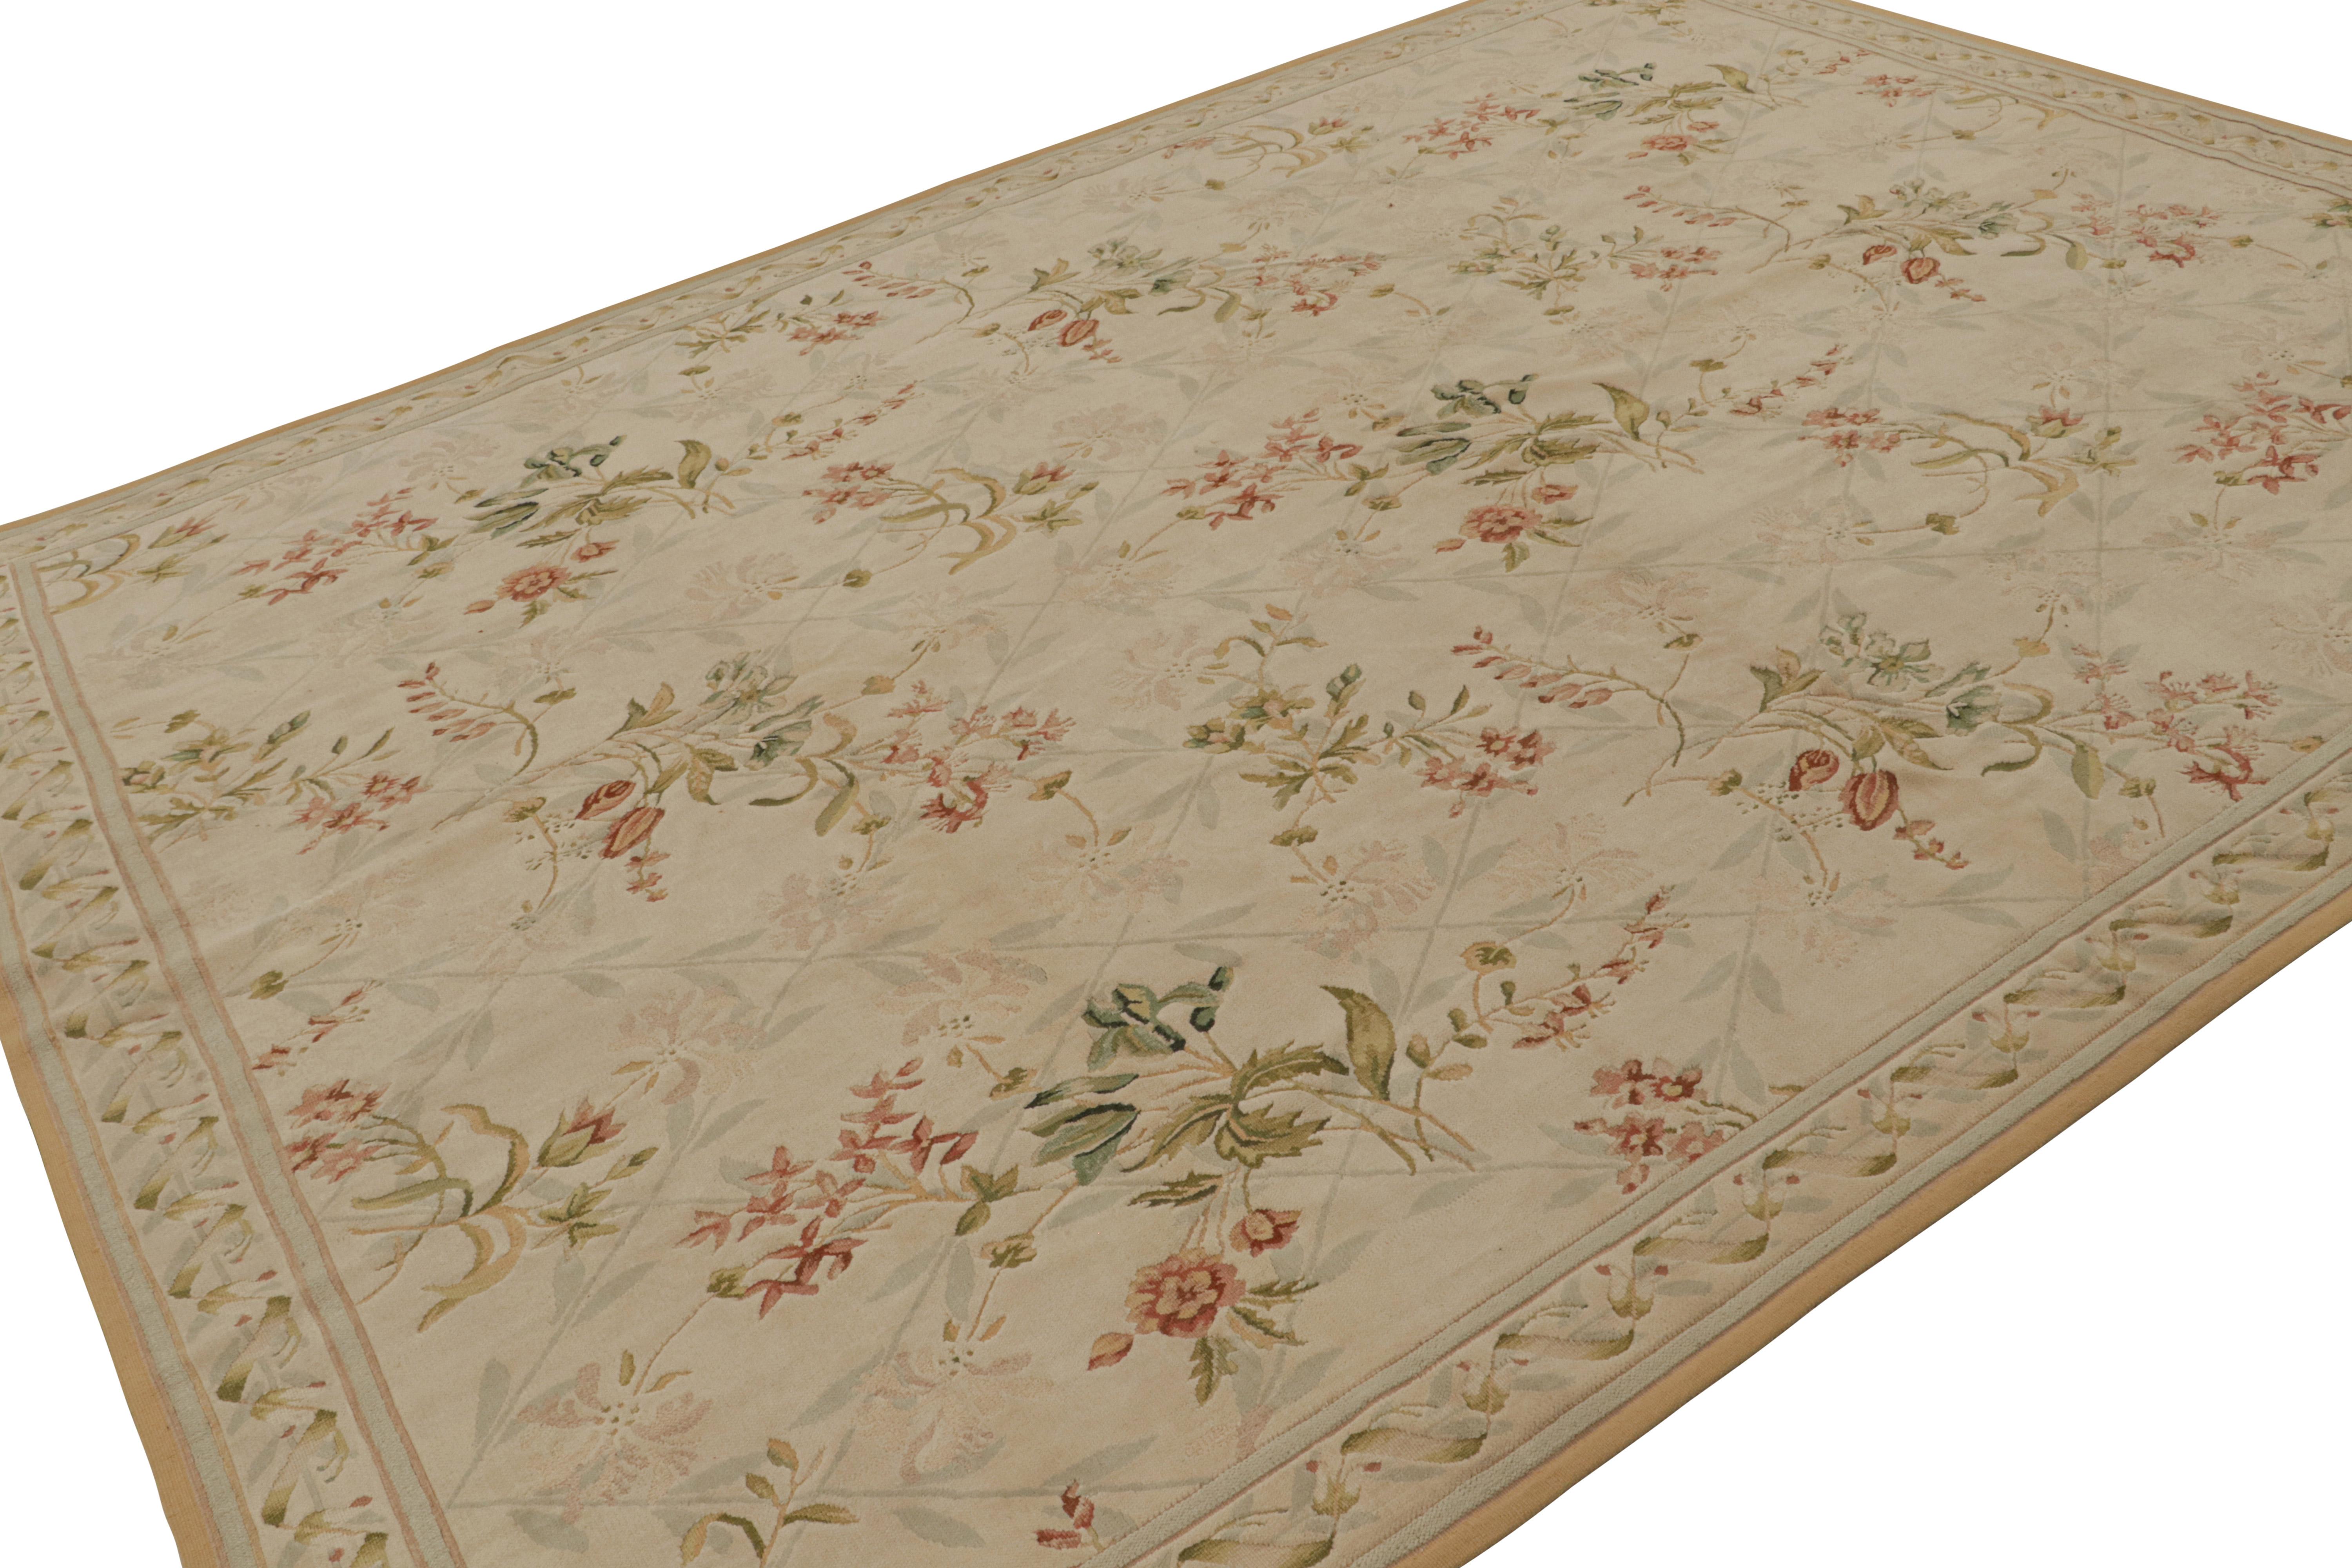 Hand-knotted in wool, this 9x12 European rug in beige is the first iteration of this design to be in high-and-low texture. Featuring green and pink floral patterns with red and cream accents, this rug is an elegant addition to the Rug & Kilim